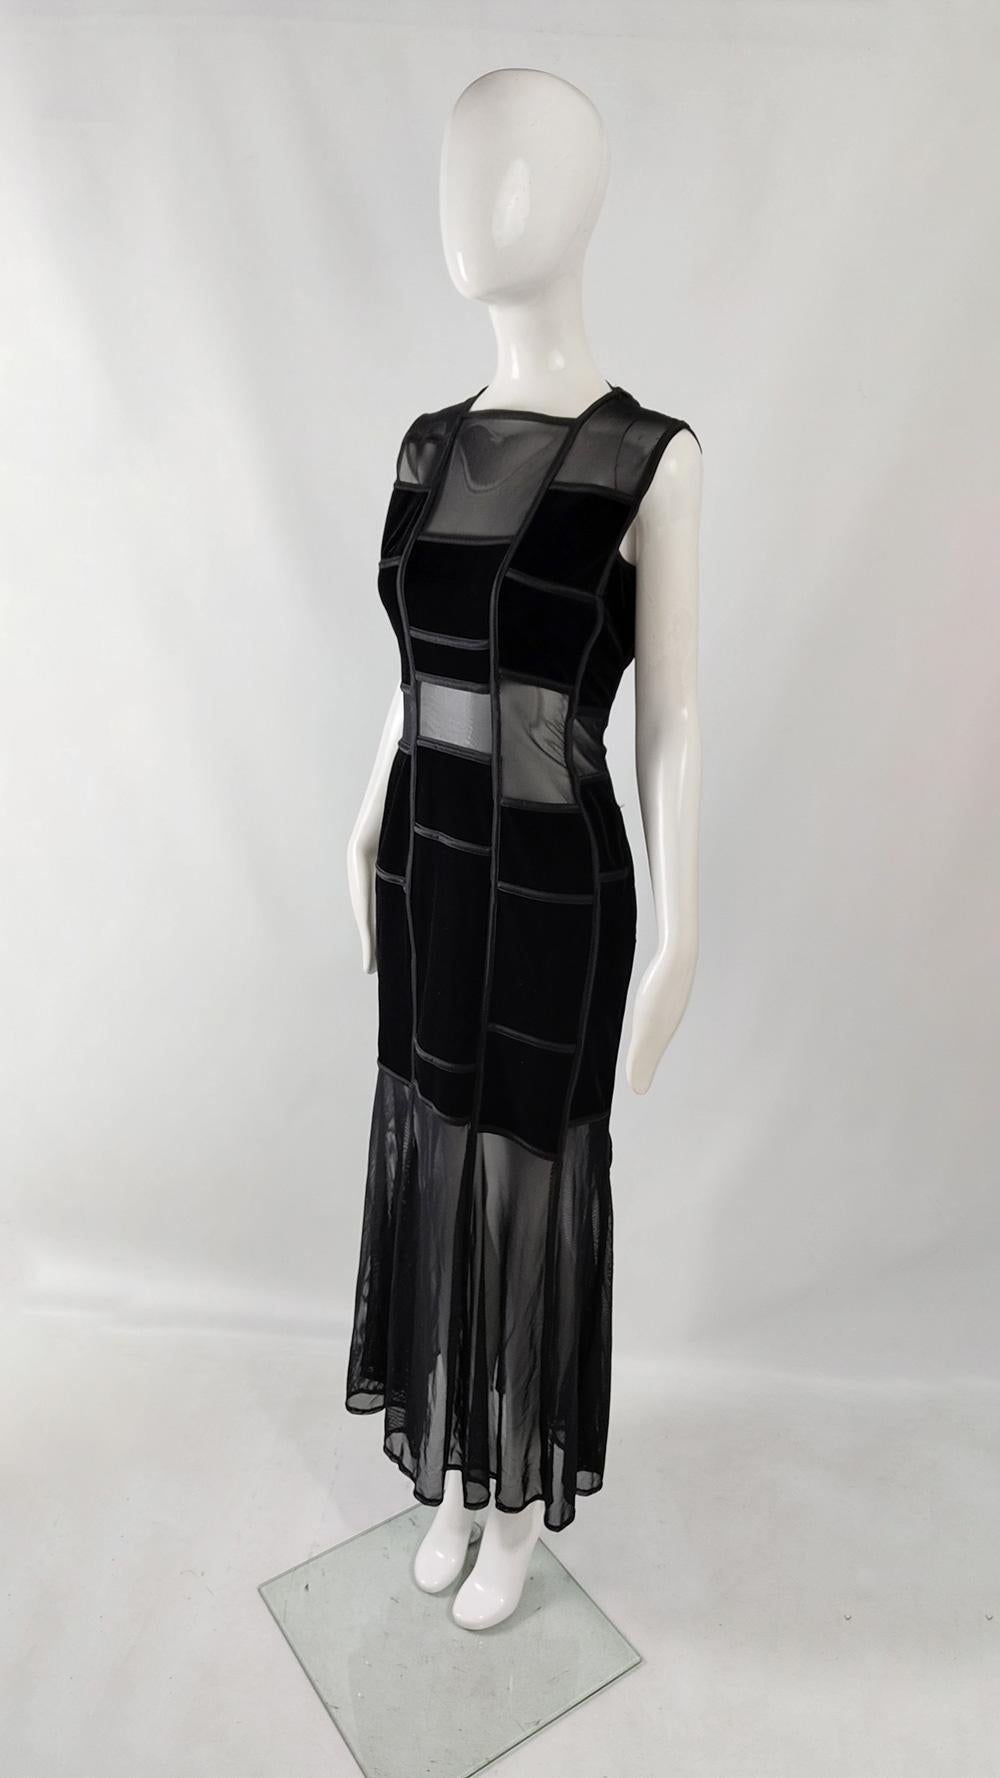 Tadashi Vintage Semi Sheer Cut Out Panels Black Velvet Evening Dress, 1990s In Excellent Condition For Sale In Doncaster, South Yorkshire